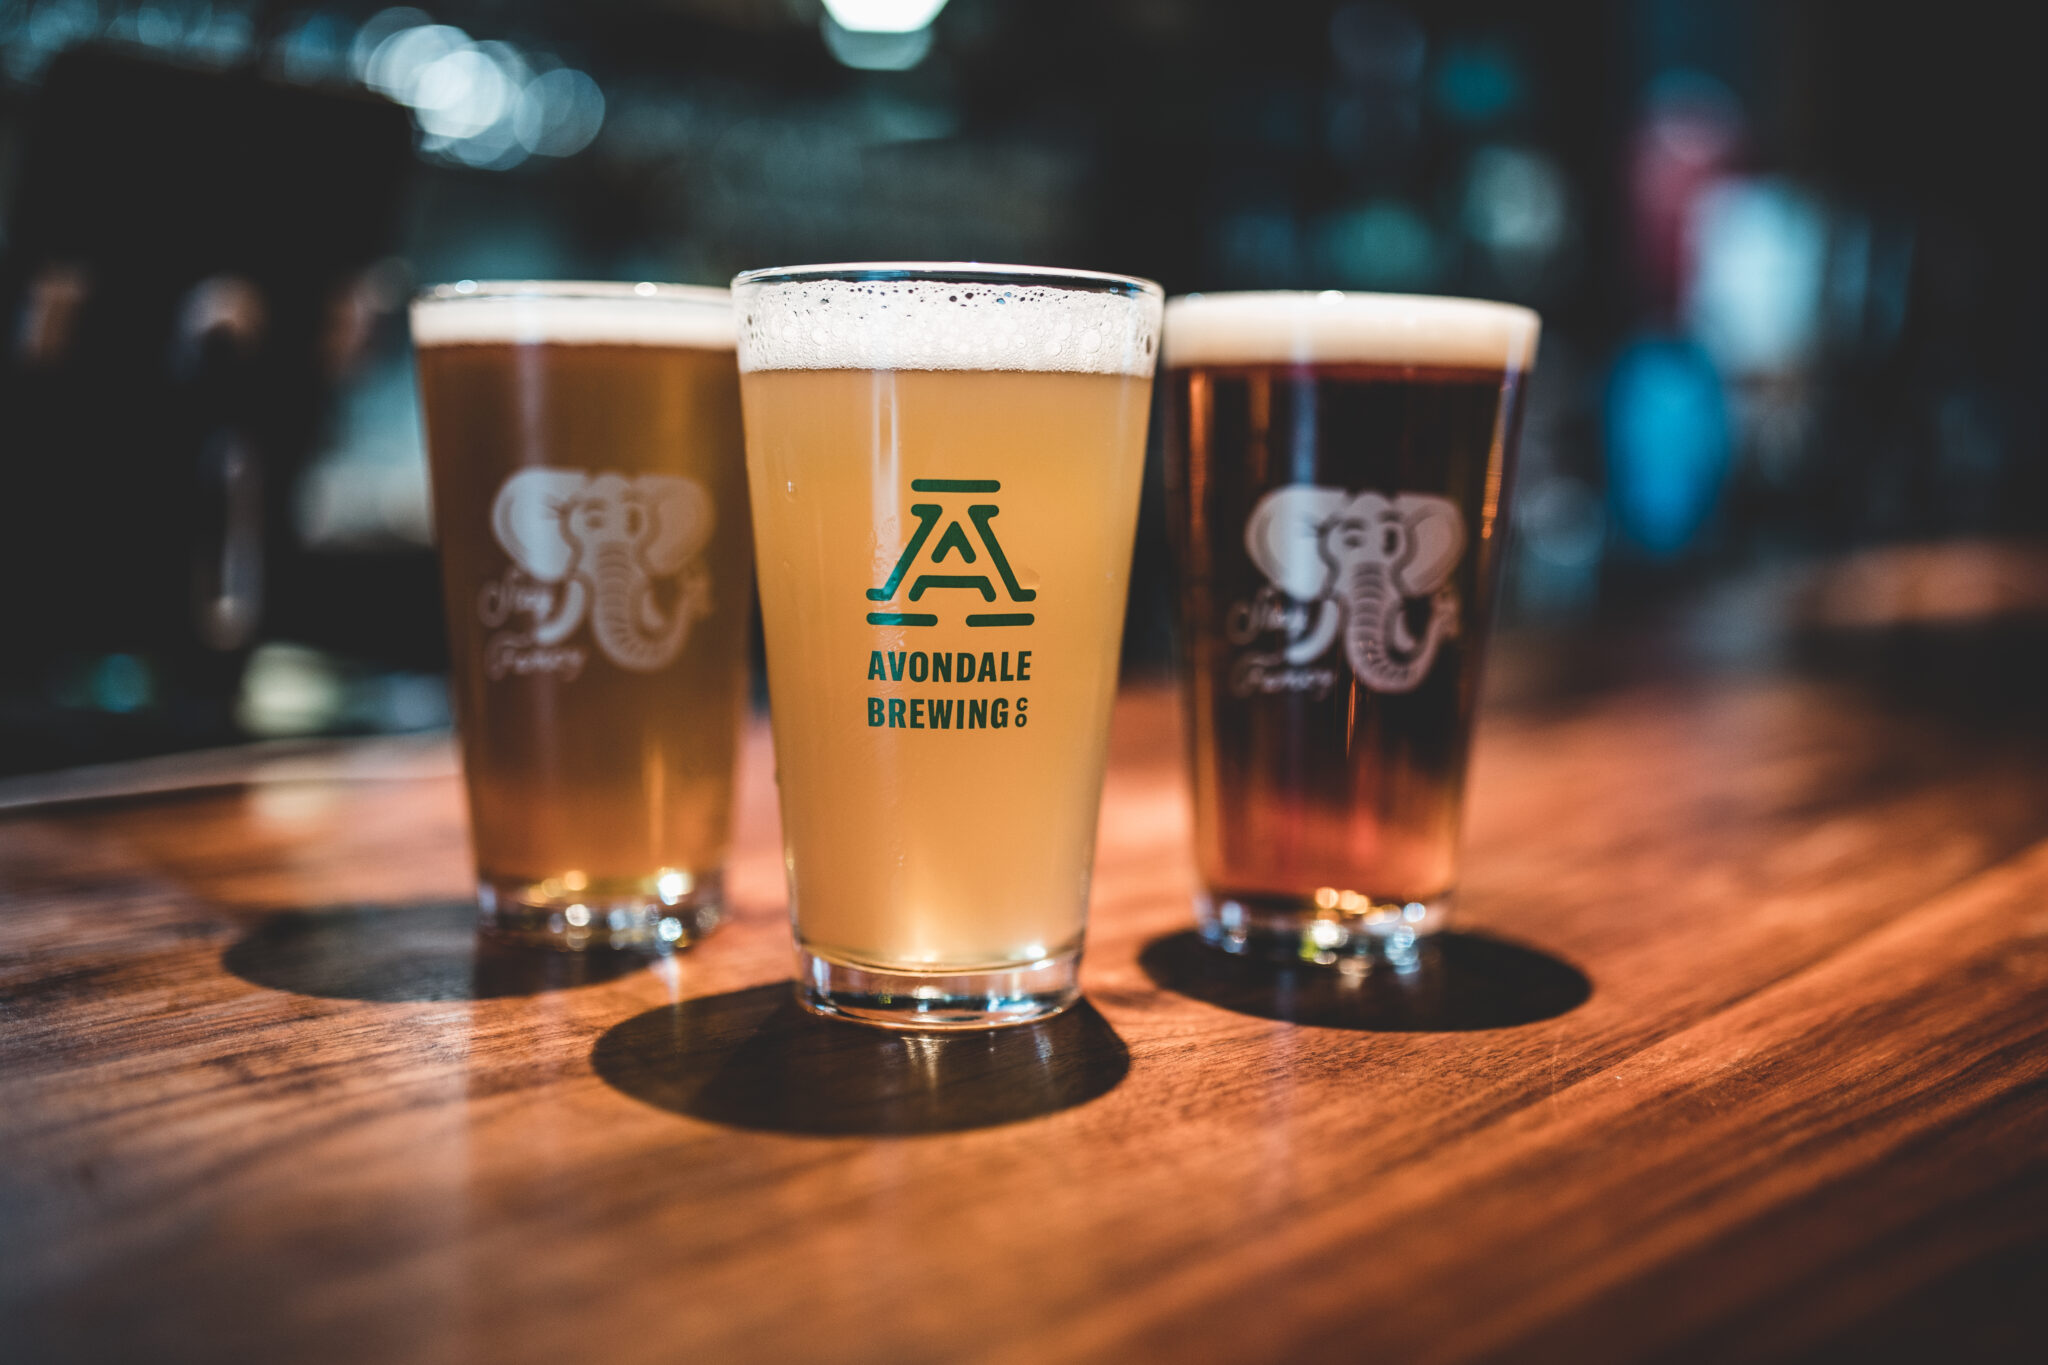 Avondale Brewing 1 22 Birmingham area festivals and events to look forward to this spring